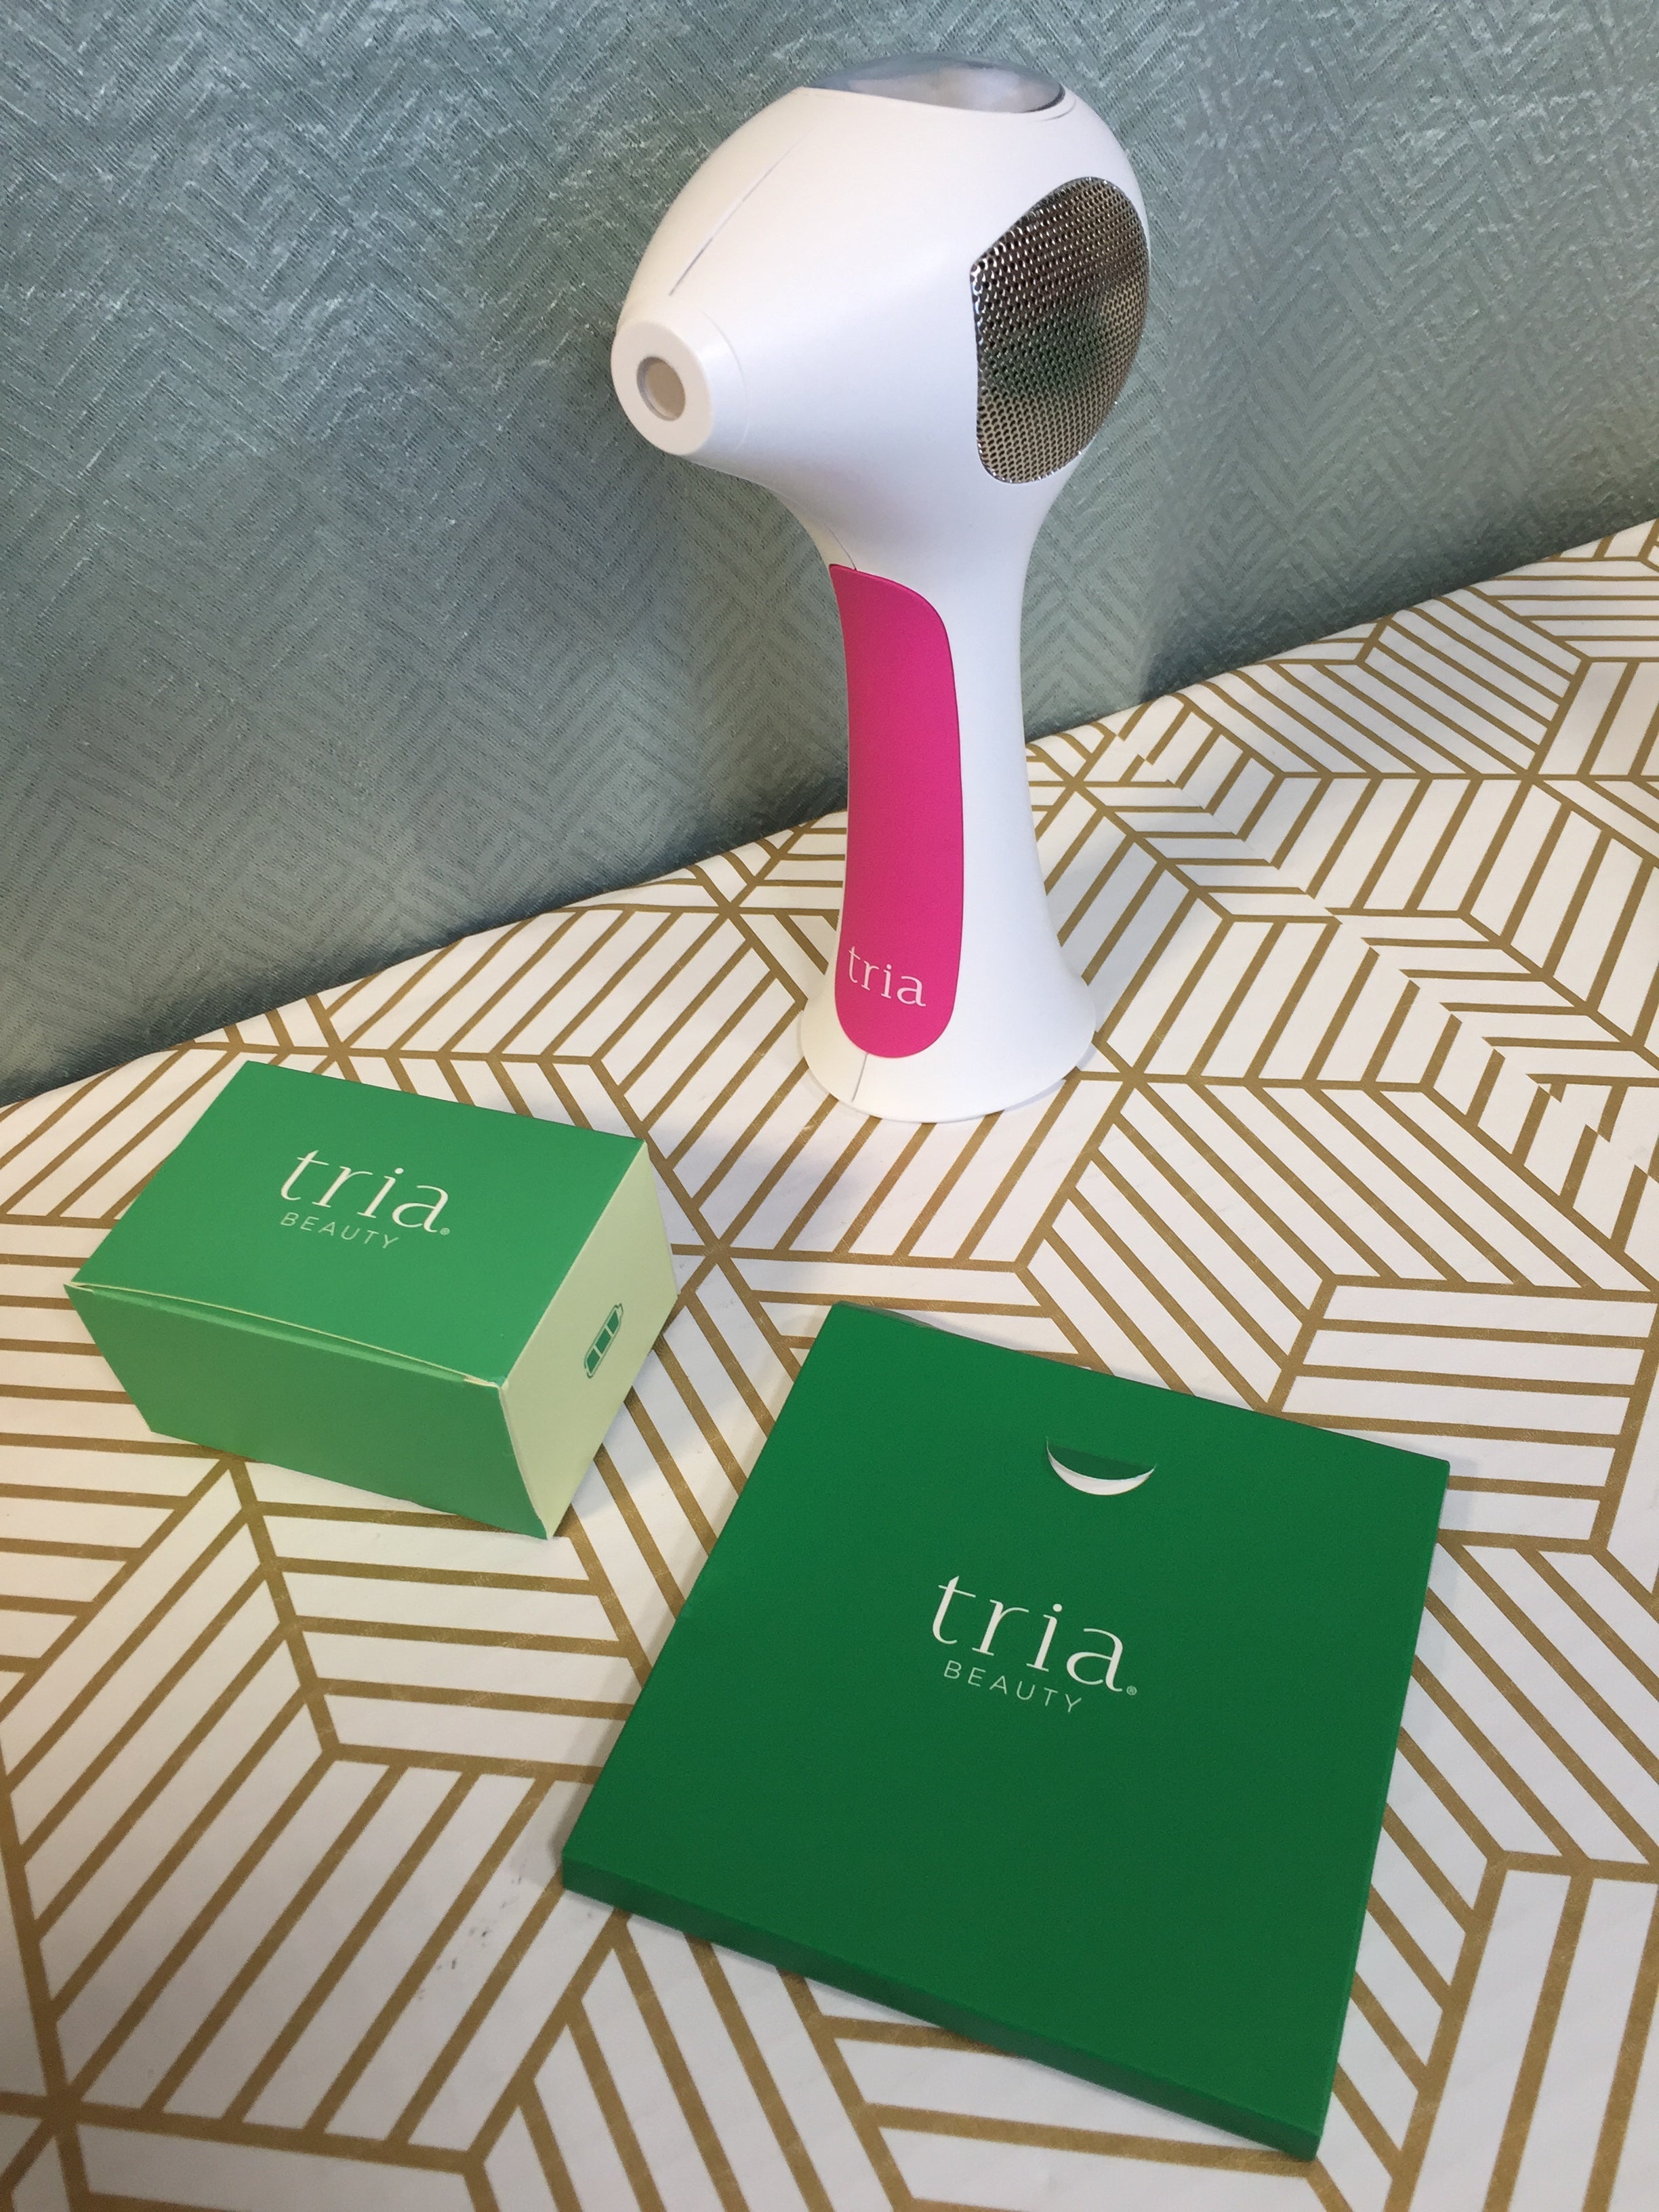 **PARTS ONLY** Tria Beauty Laser Hair Removal Device 4X **ERROR ON SCREEN** (7679088787694)